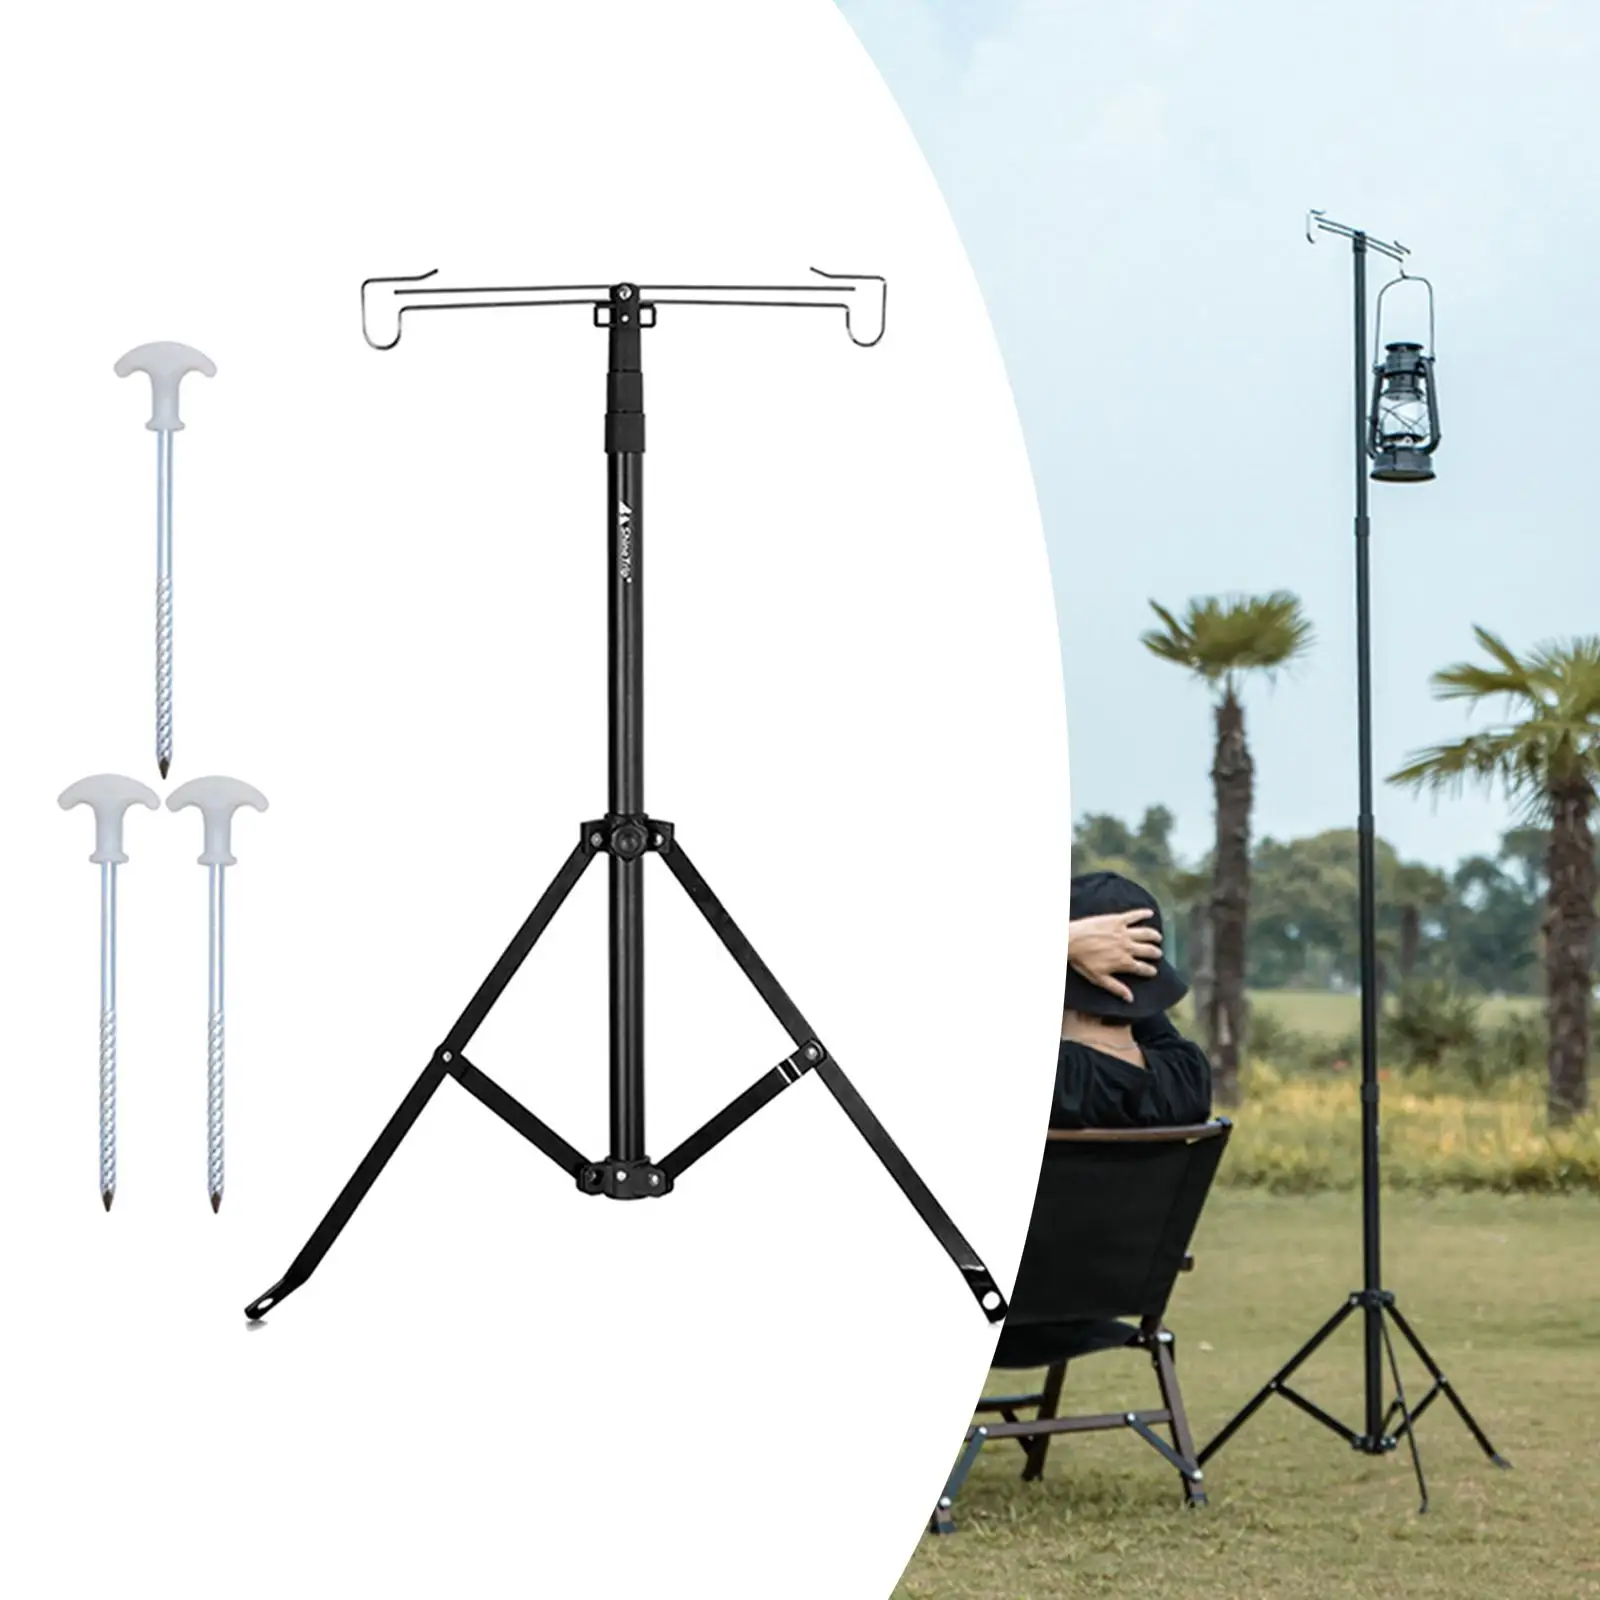 Camping Lantern Post Tripod Design Portable Folding Collapsible for Barbecue